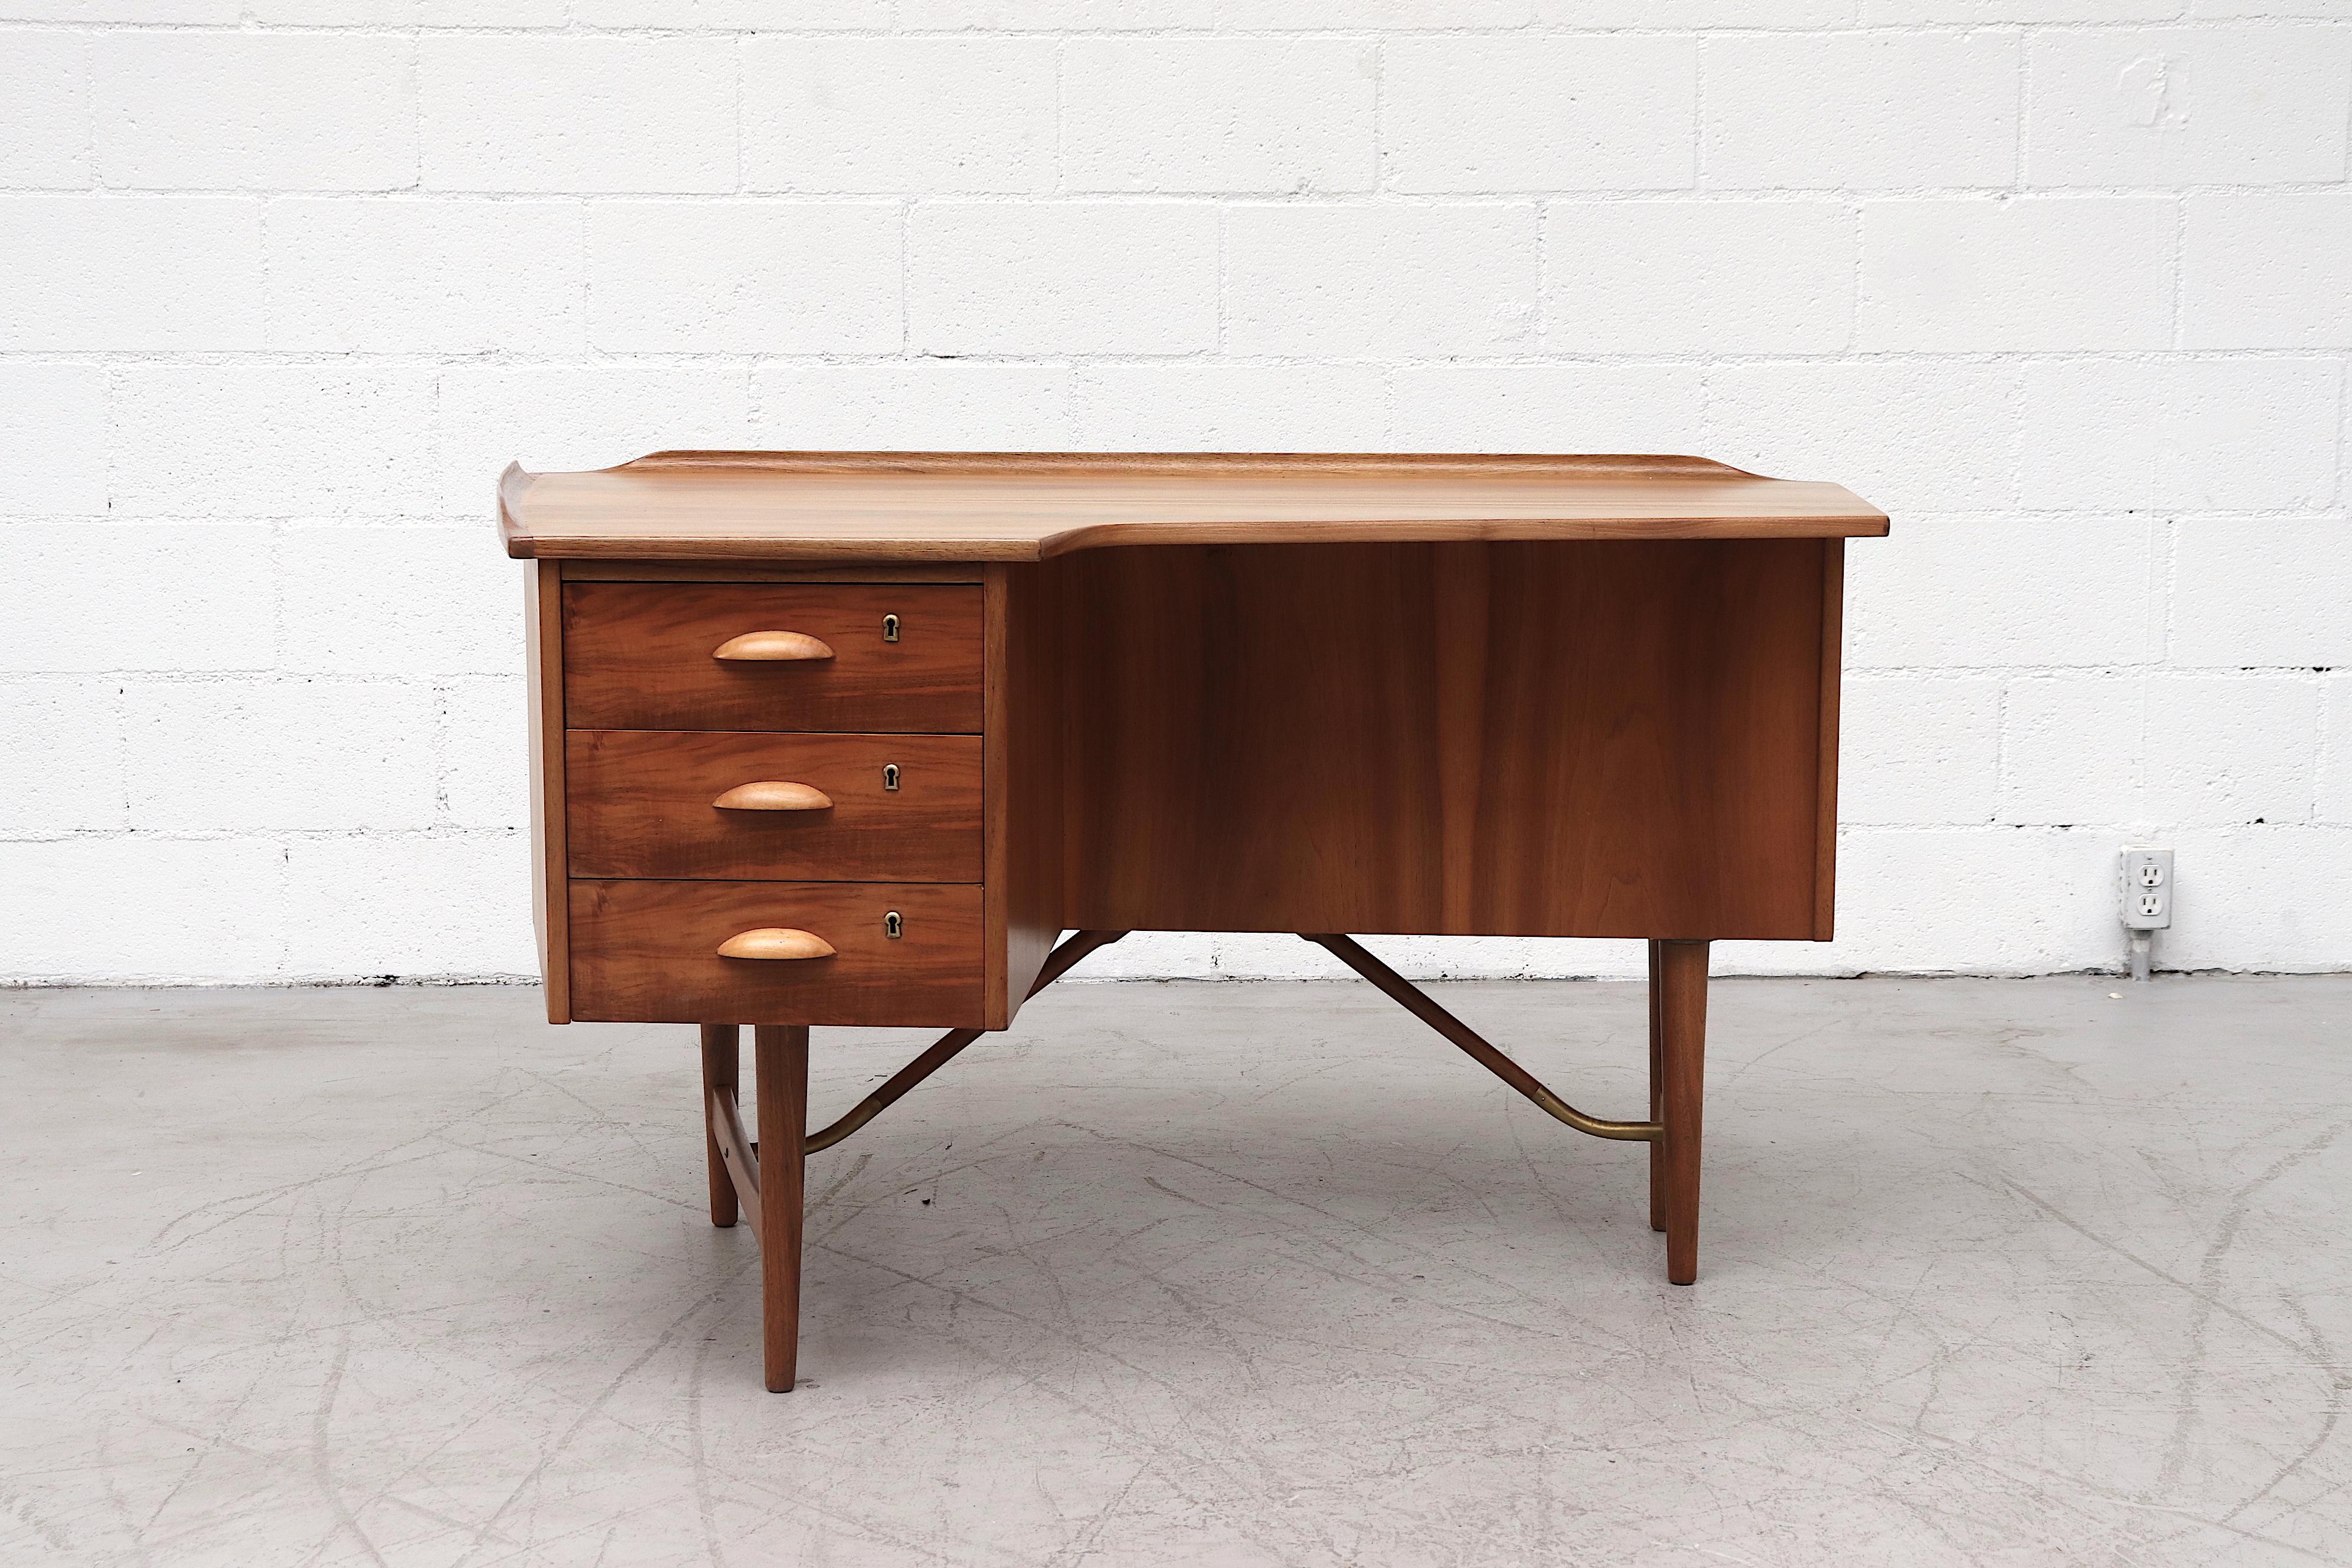 Beautiful Peter Lovig (Attributed) midcentury teak boomerang desk with raised edge, eyelid handles, 3 stacked side drawers with key and built in back bookshelf. Lightly refinished with brass accents, round wood legs. In original condition with